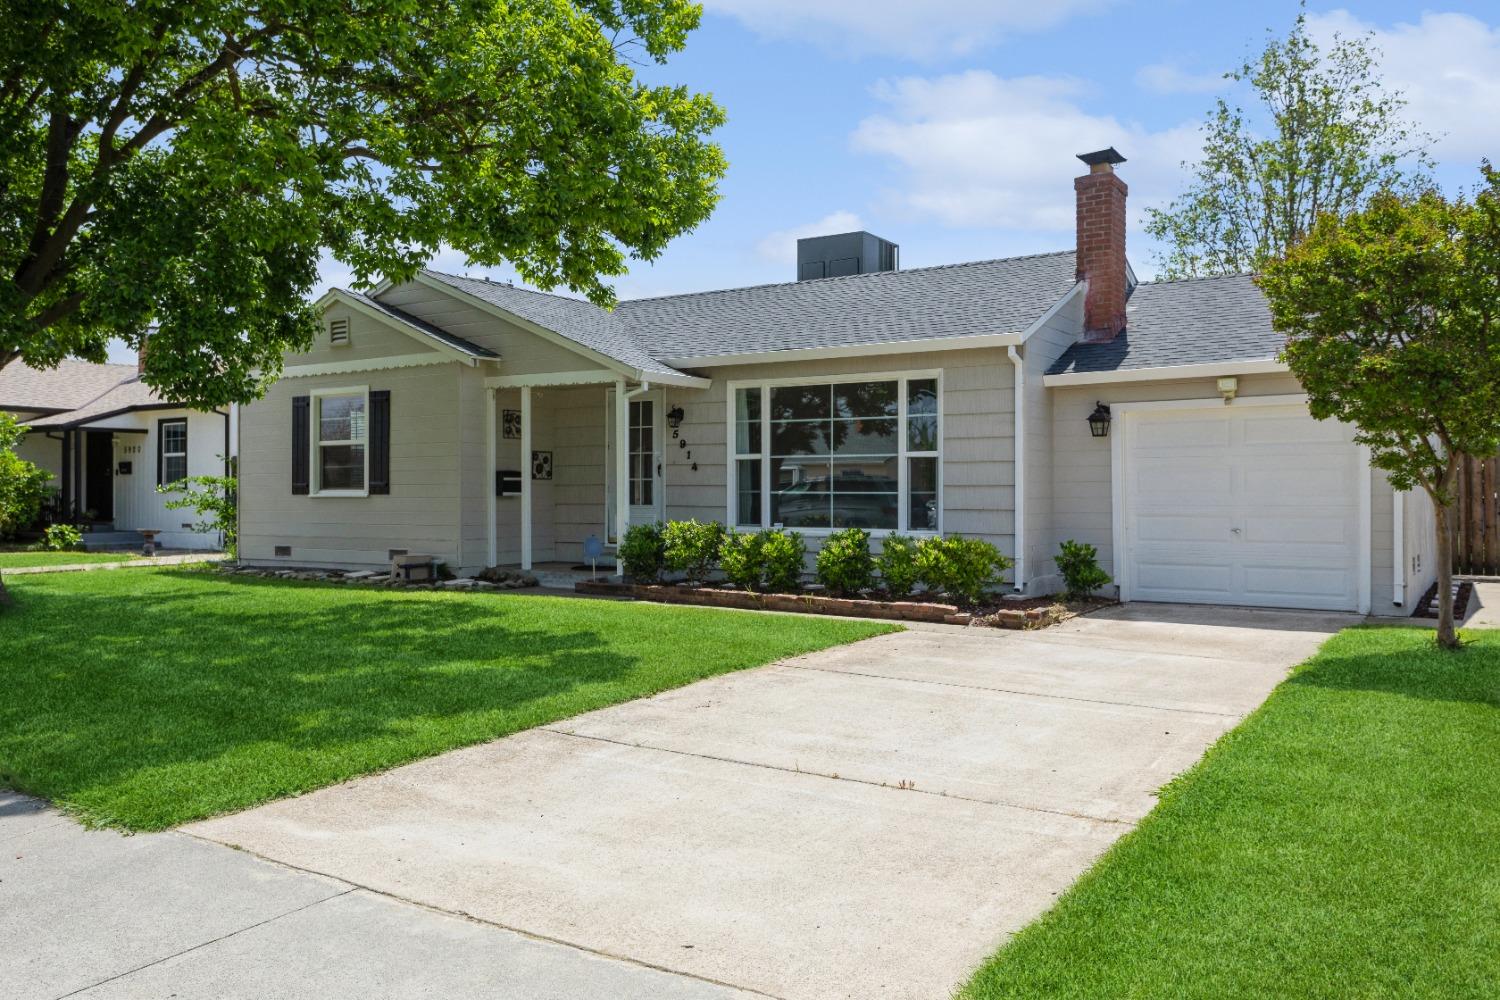 Photo of 5914 33rd Ave in Sacramento, CA